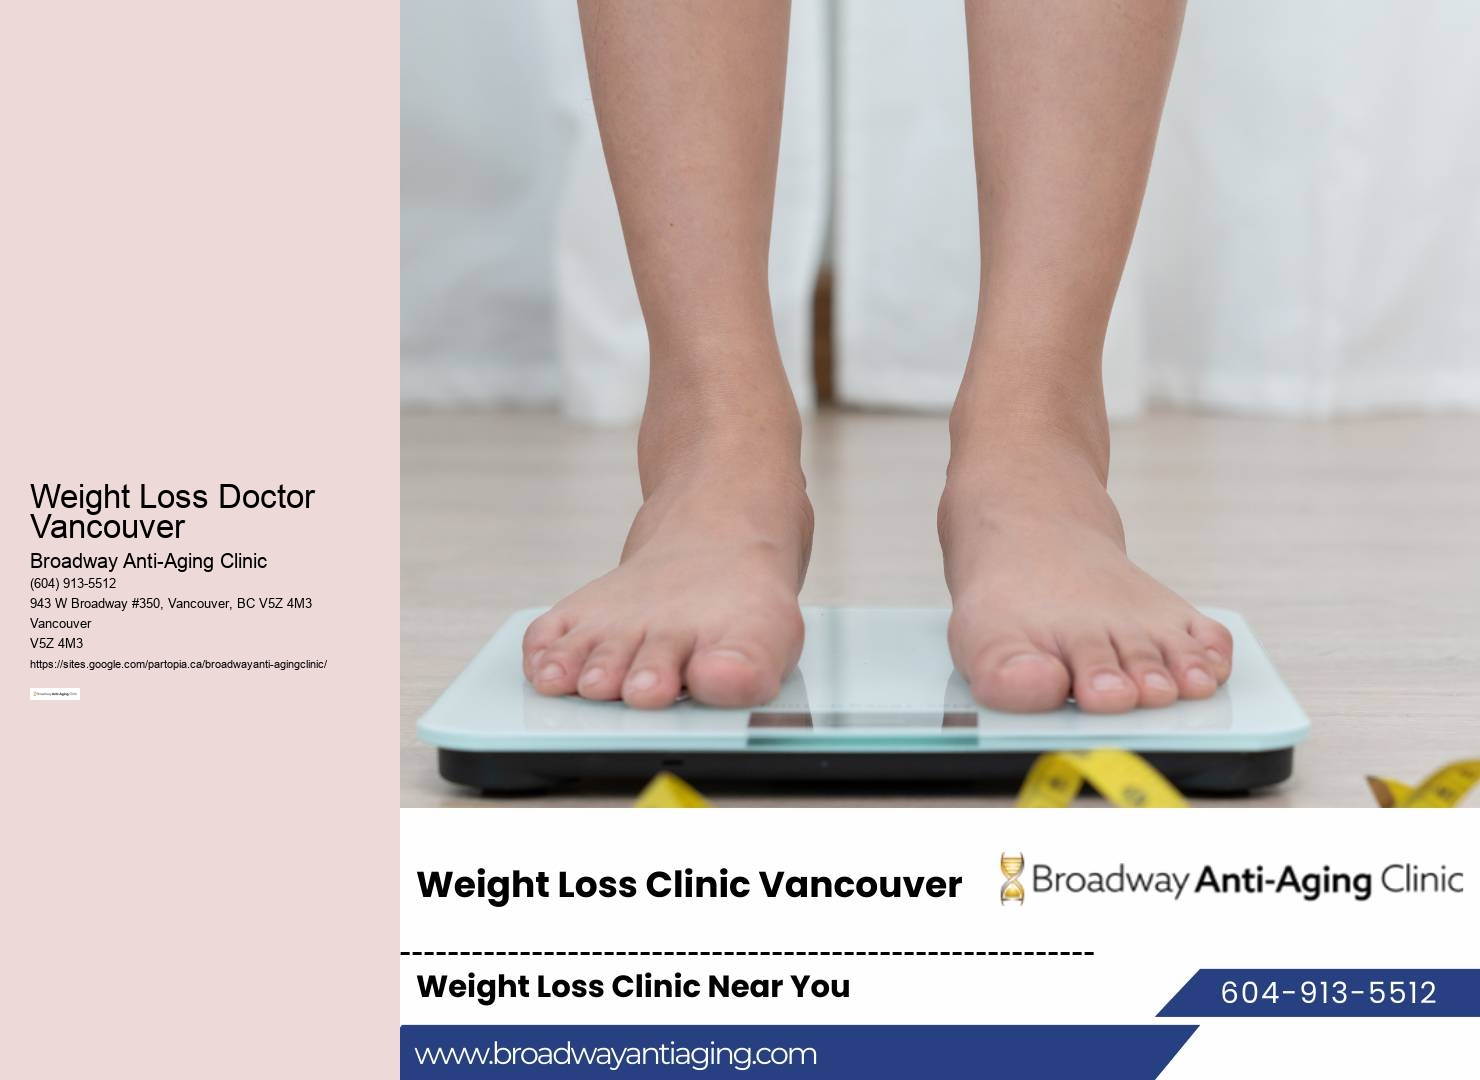 Insider Insights into Weight Loss Clinic Operations